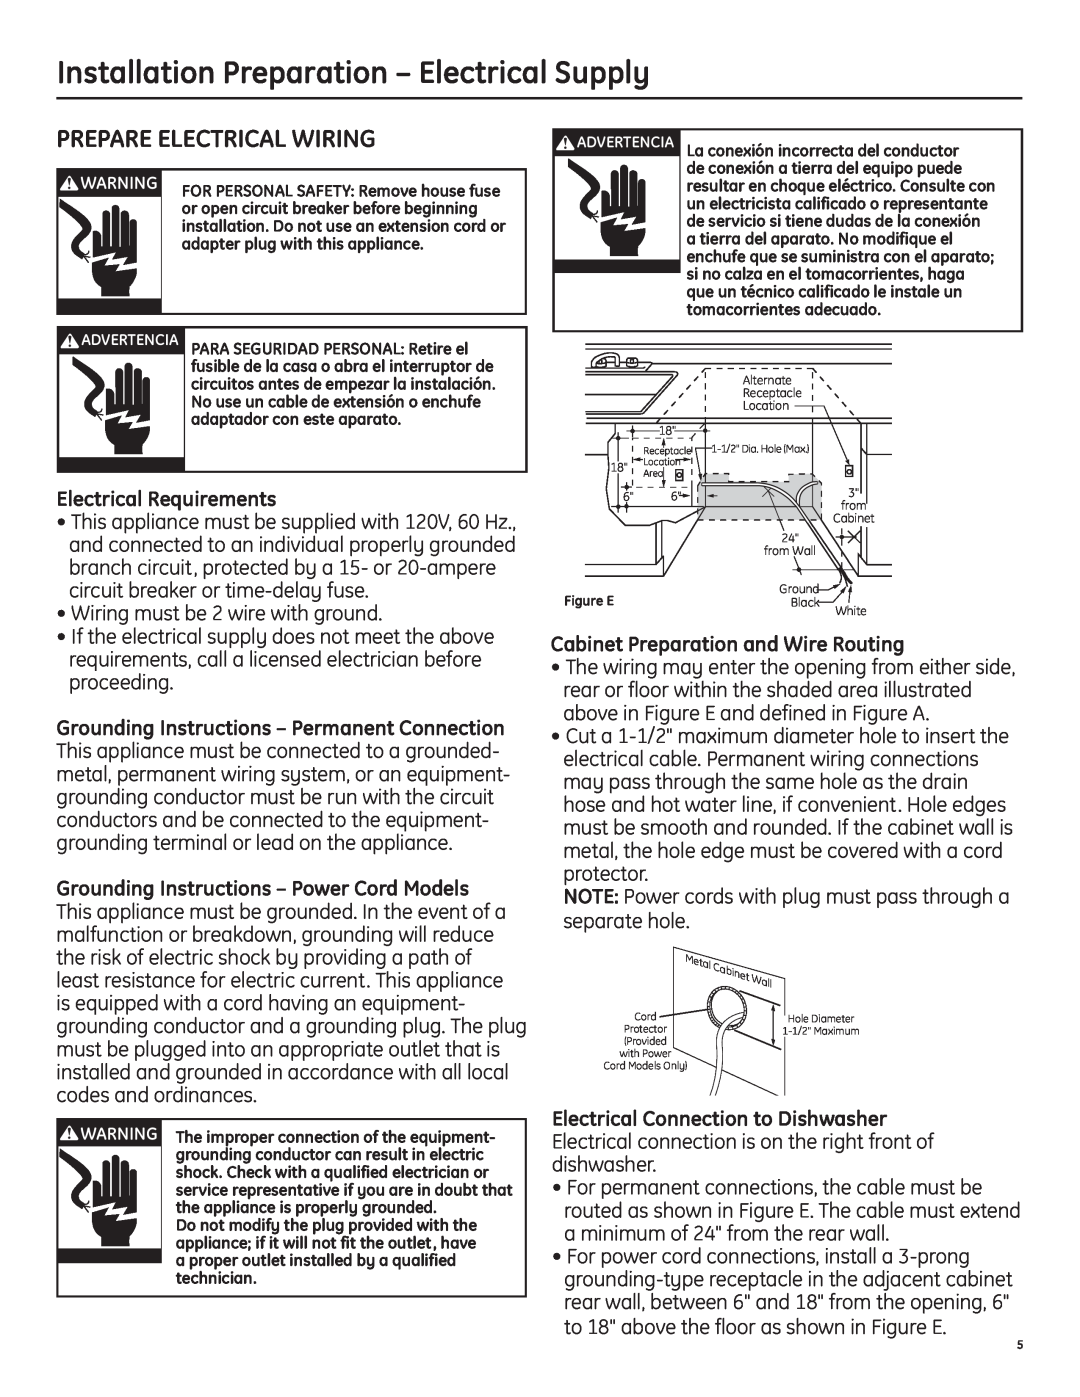 GE 206C1559P195 installation instructions Installation Preparation - Electrical Supply, Prepare Electrical Wiring 